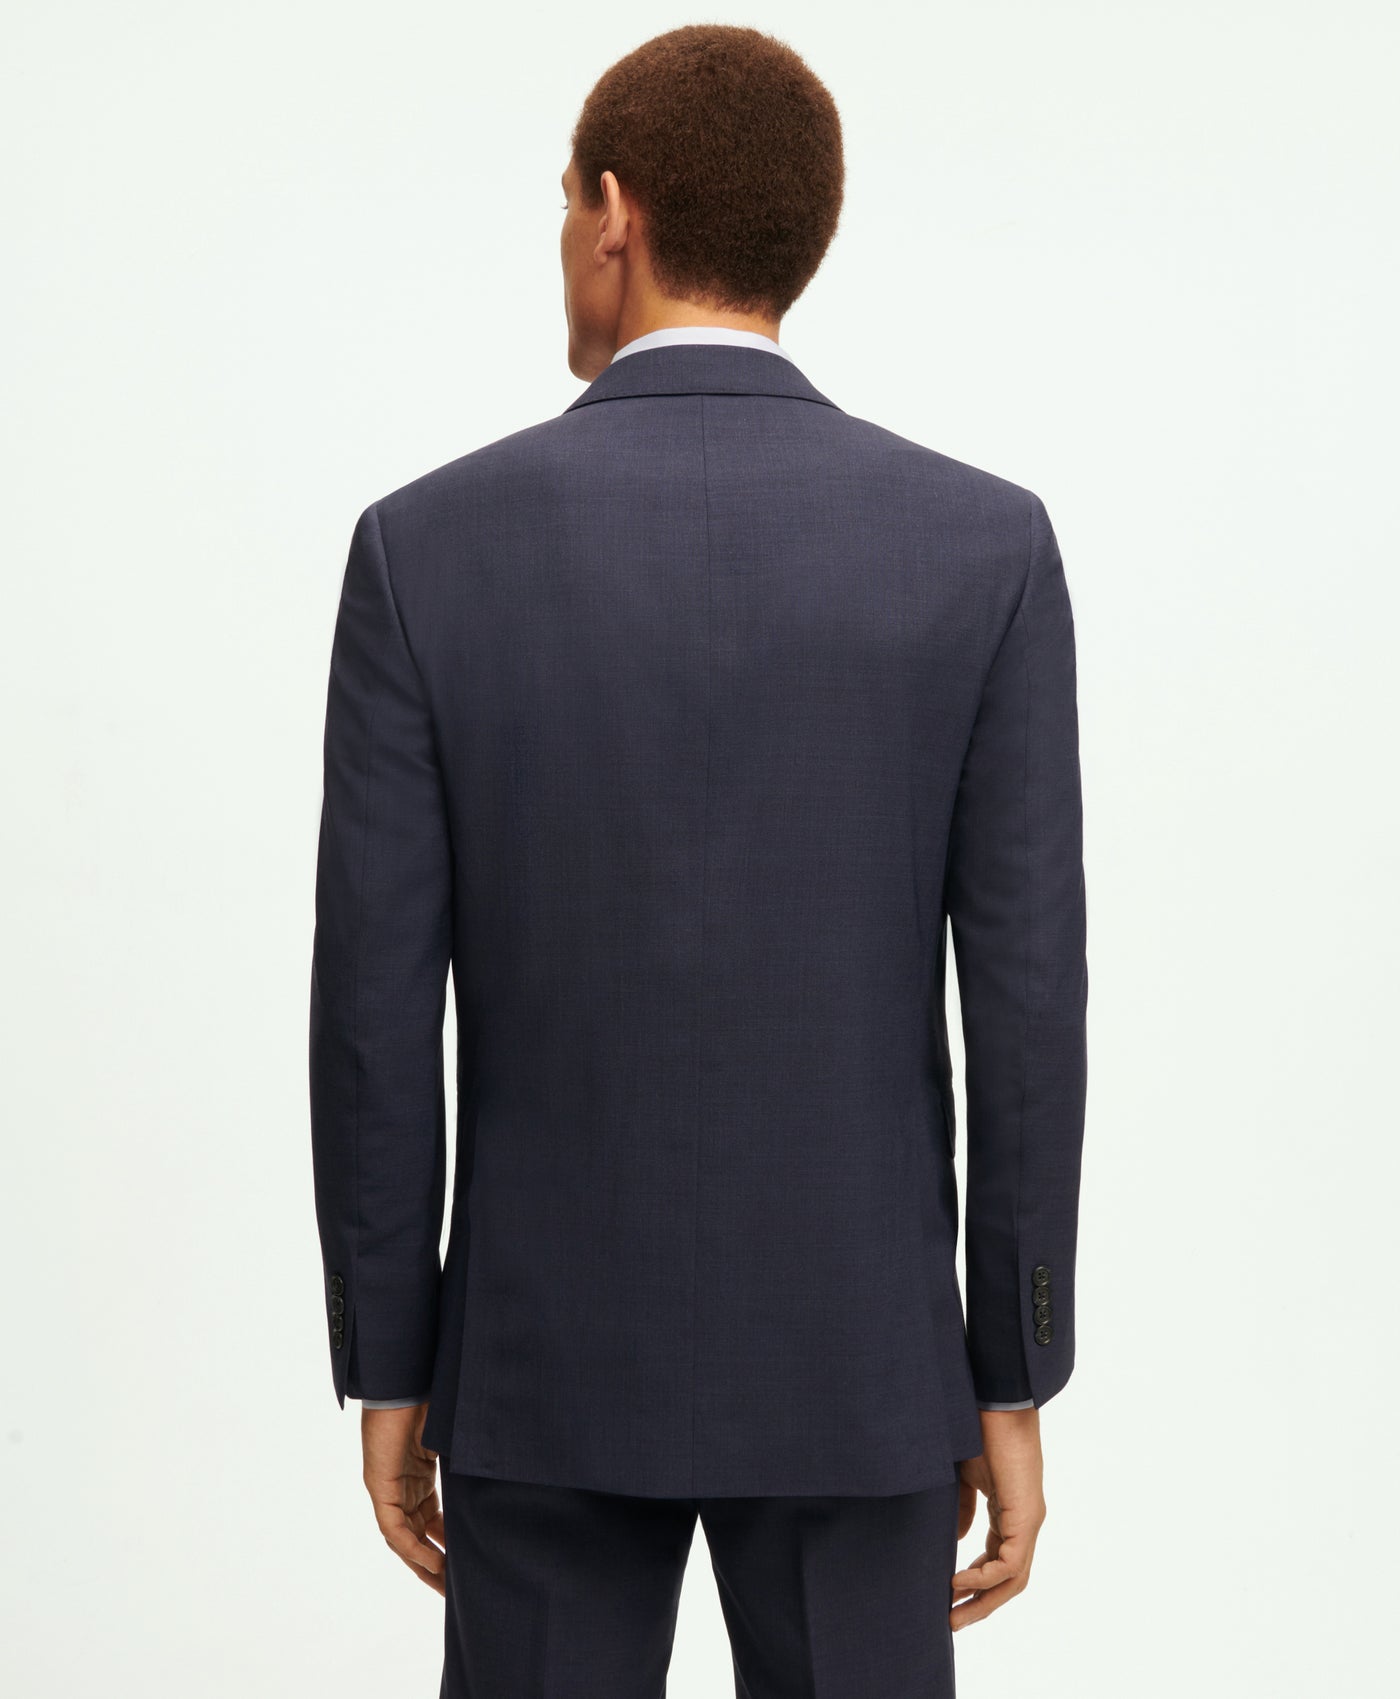 Brooks Brothers Explorer Collection Milano Fit Merino Wool Suit Jacket - Brooks Brothers Canada